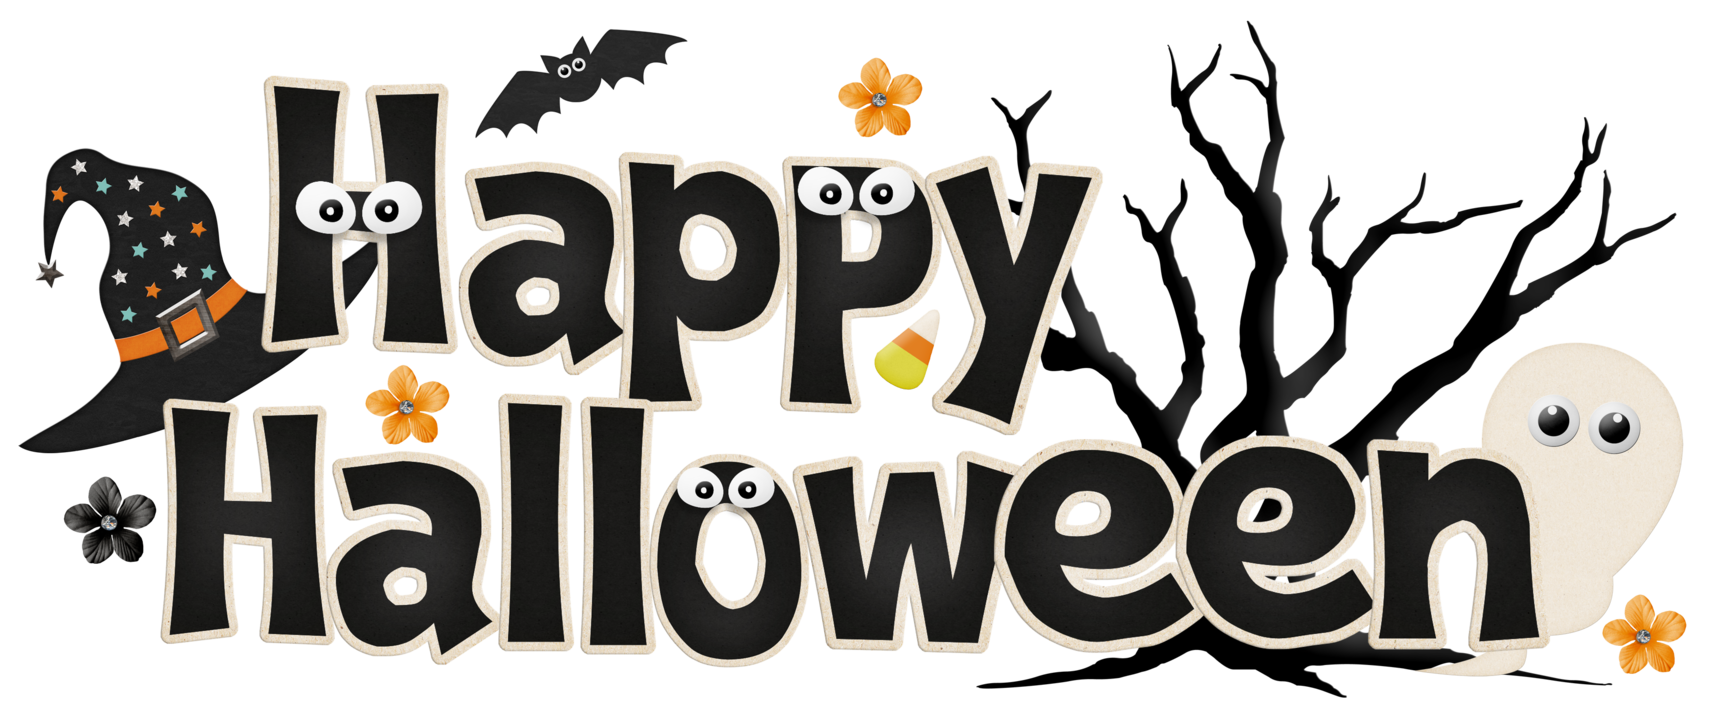 halloween signs clipart - photo #8